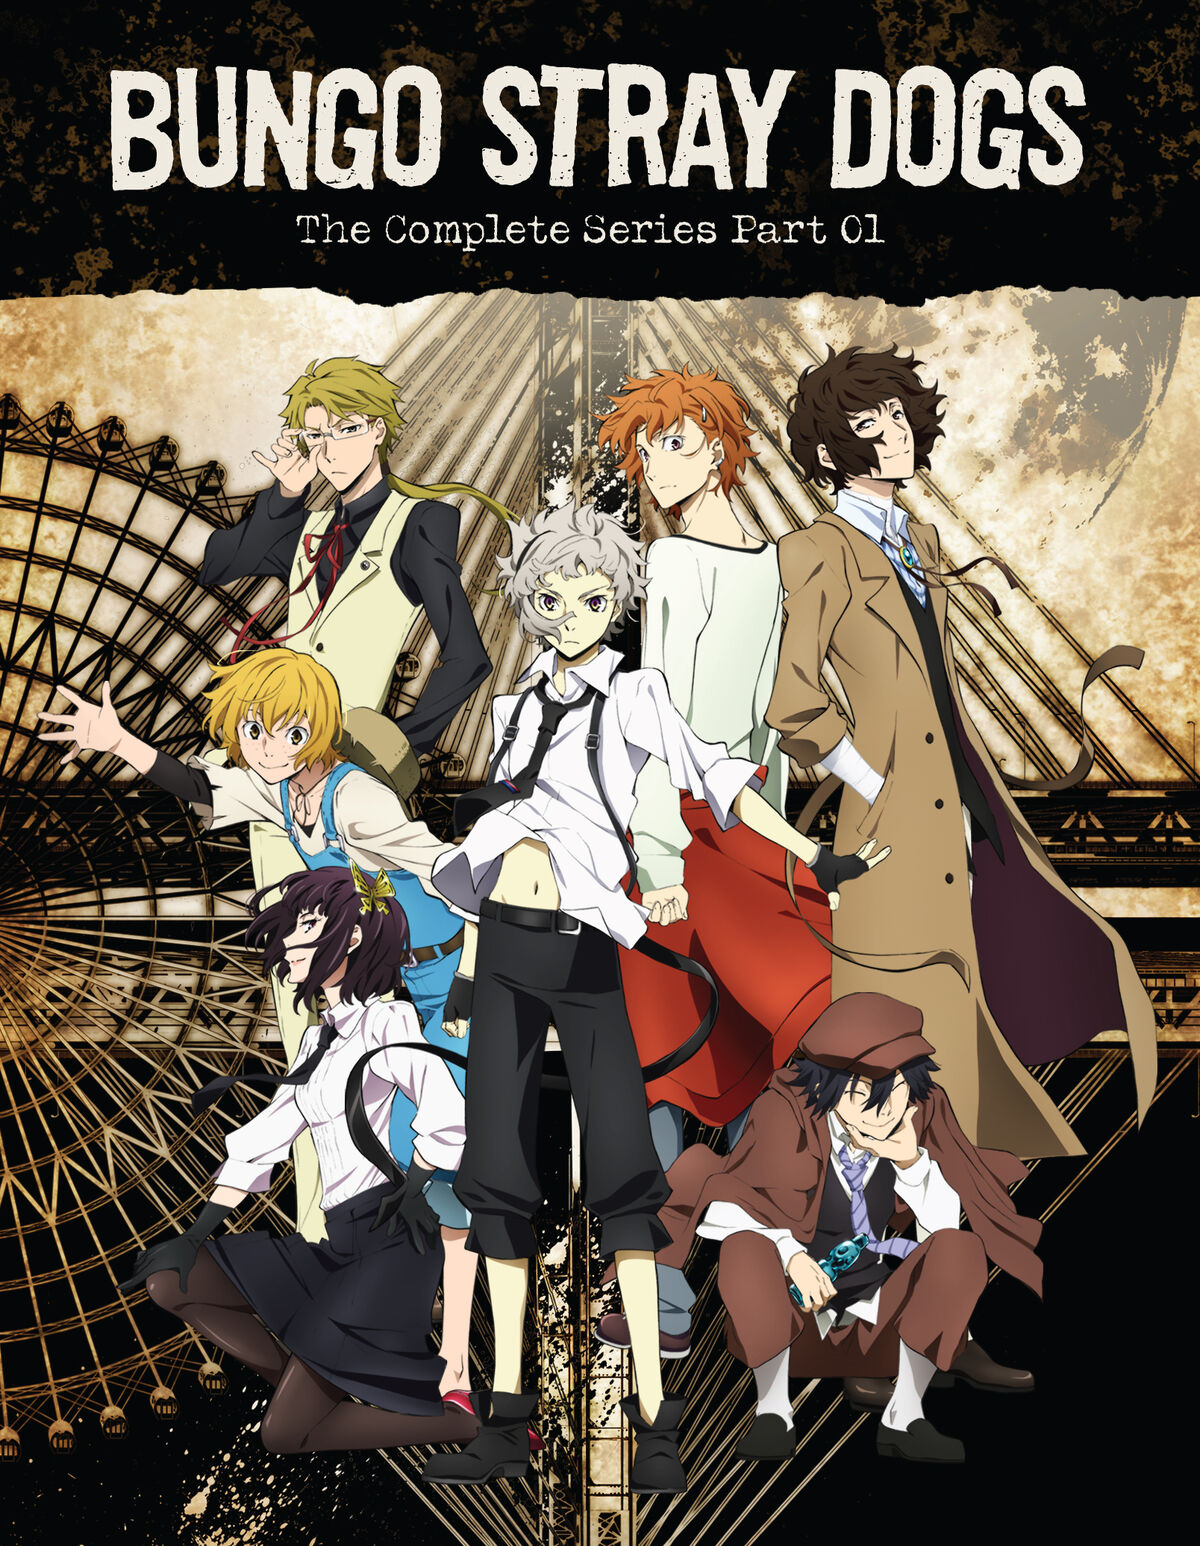 Bungo Stray Dogs Wiki  文ストウイキ on X: This is the Twitter account of the  Bungō Stray Dogs Wiki! Come join our community!   #bungosd #bsd #bsdtwt #BungouStrayDogs #BungoStrayDogs #文スト   /